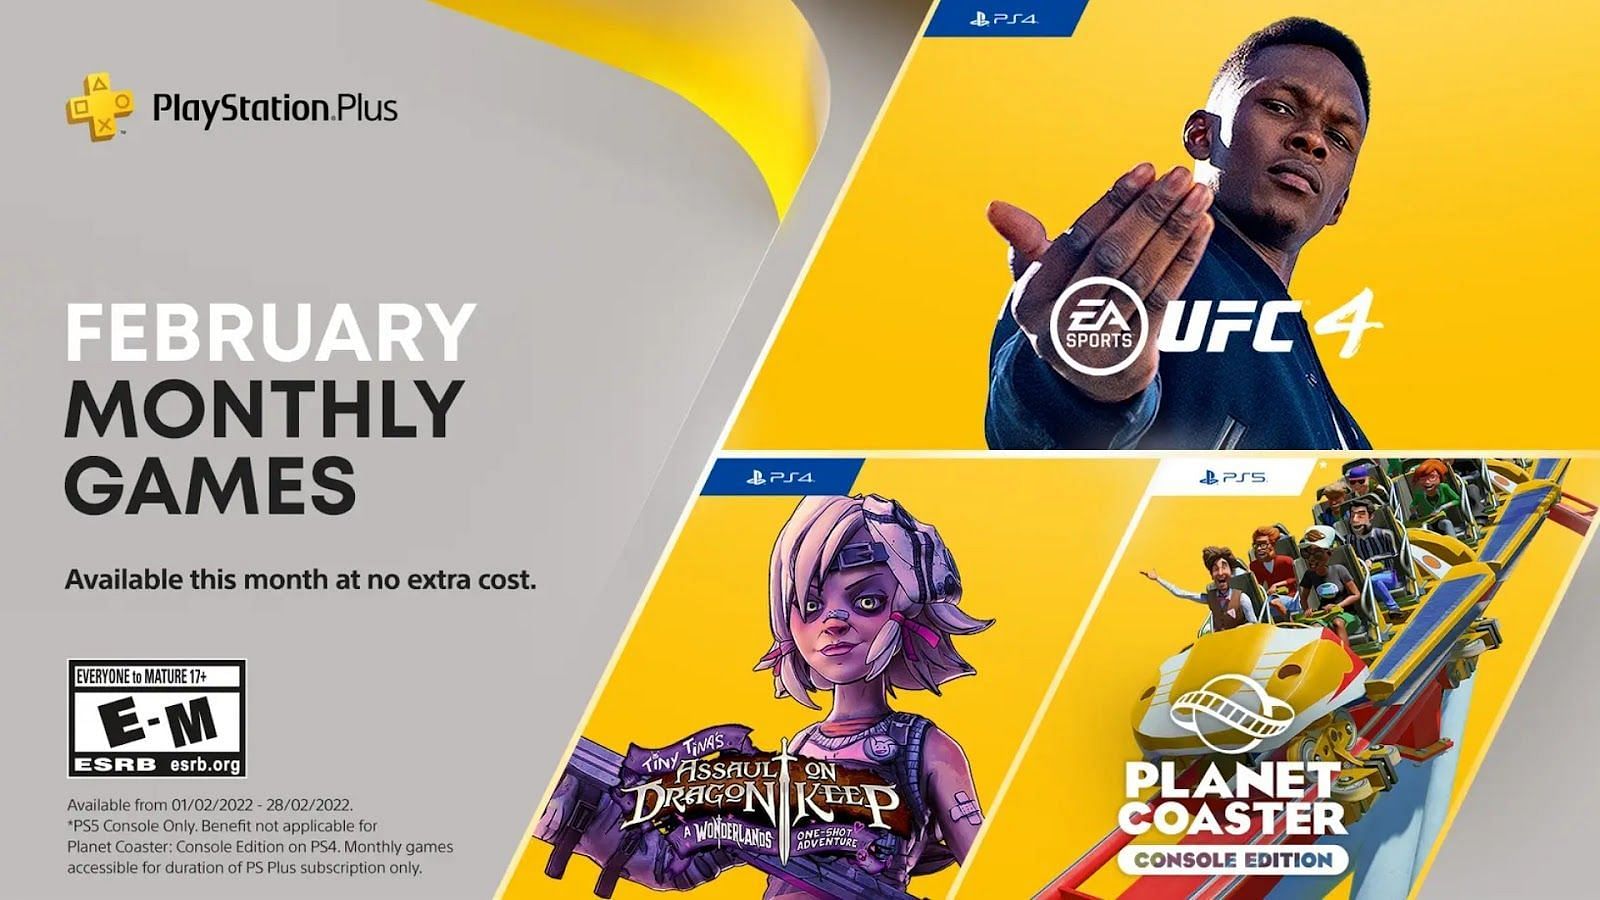 PlayStation Plus games free in February 2022 (Image by PlayStation)